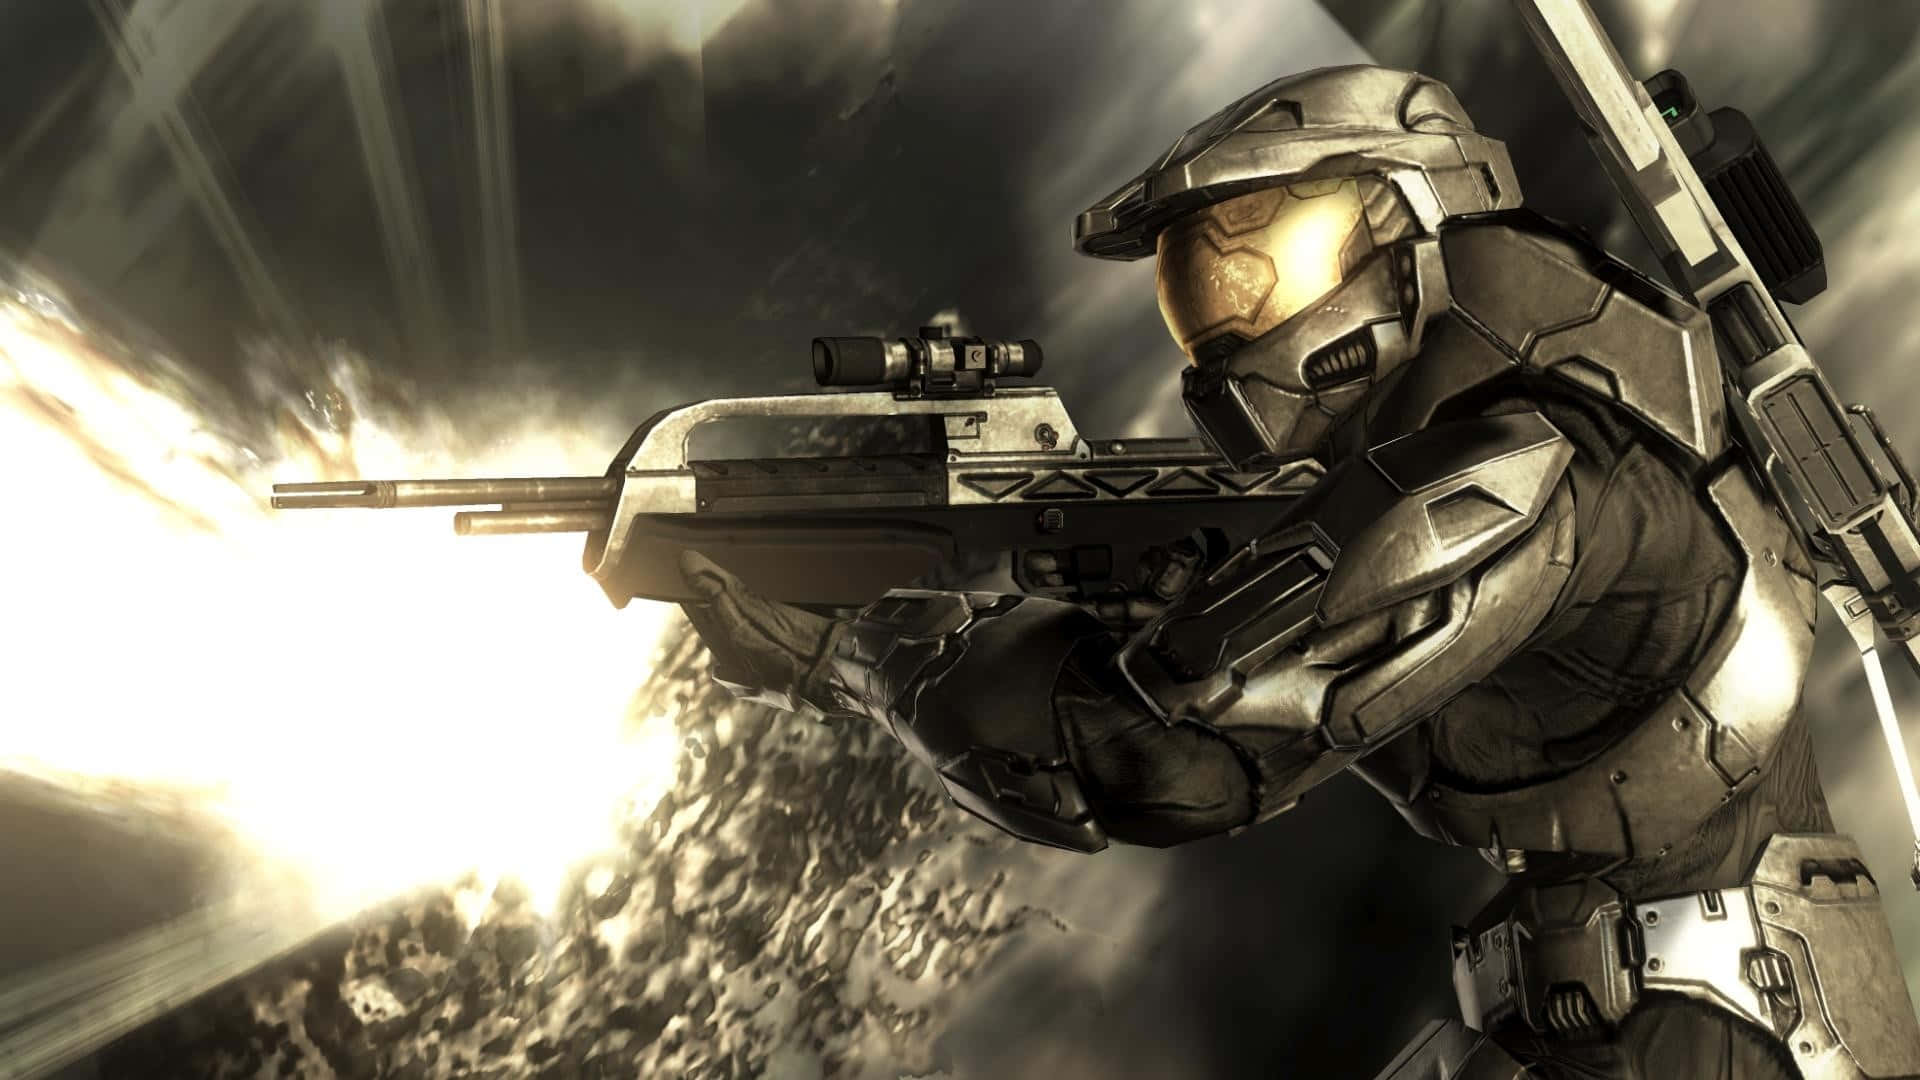 Halo 3 Wallpapers Halo 3 Wallpapers